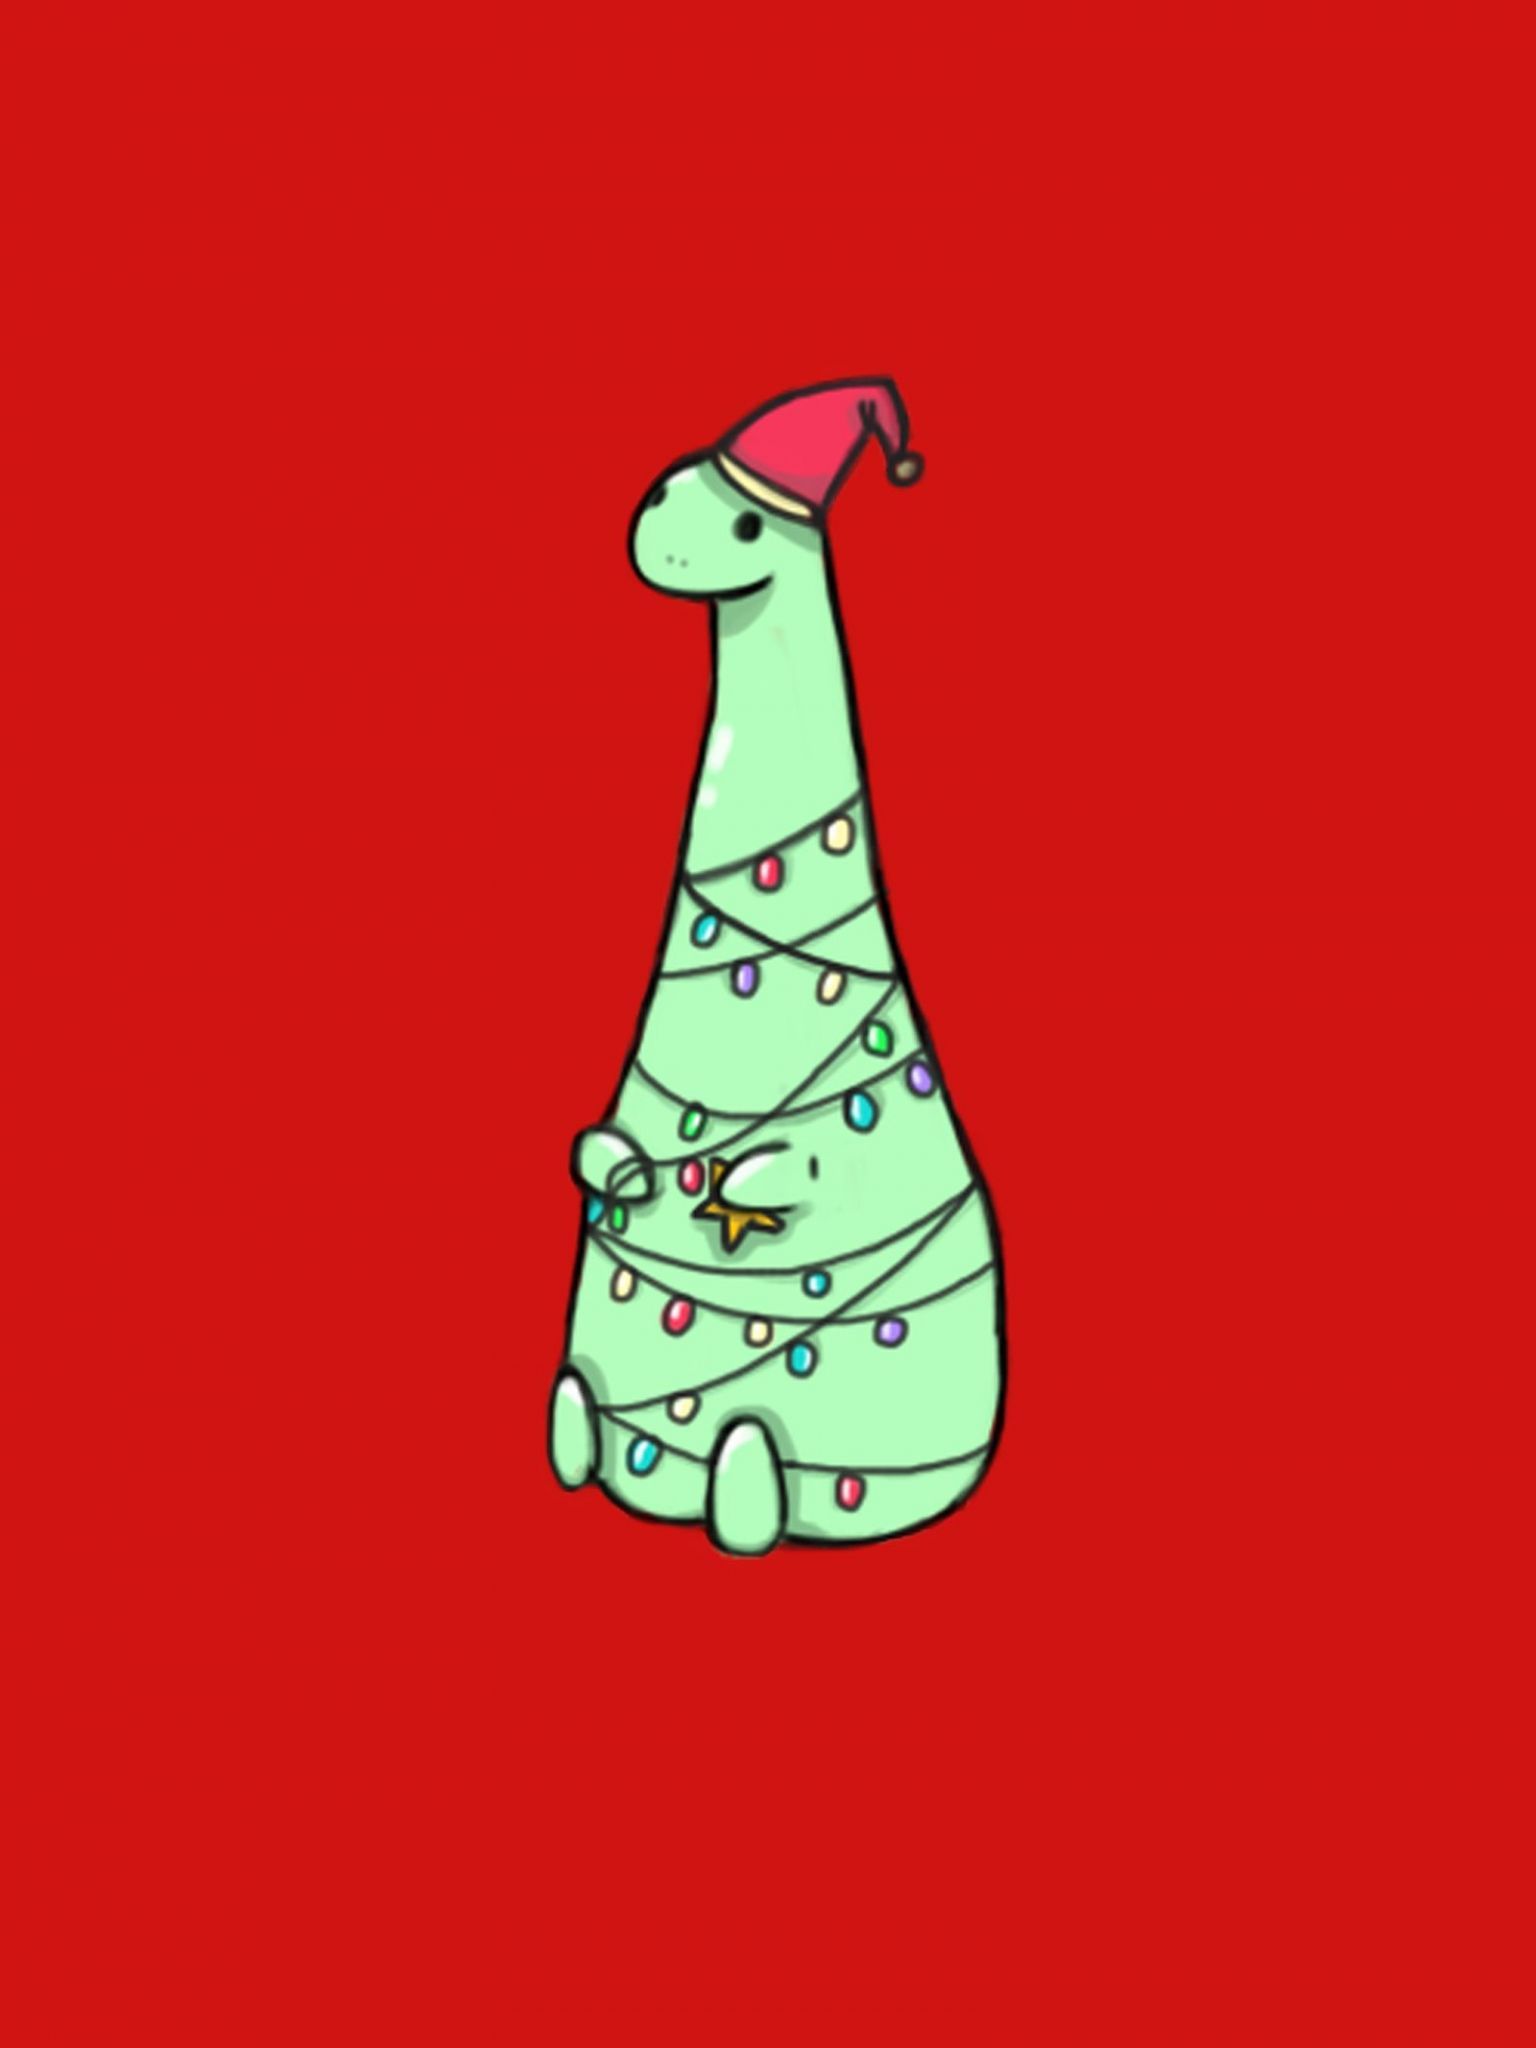 A green dinosaur wearing a Santa hat and covered in Christmas lights. - Christmas, cute Christmas